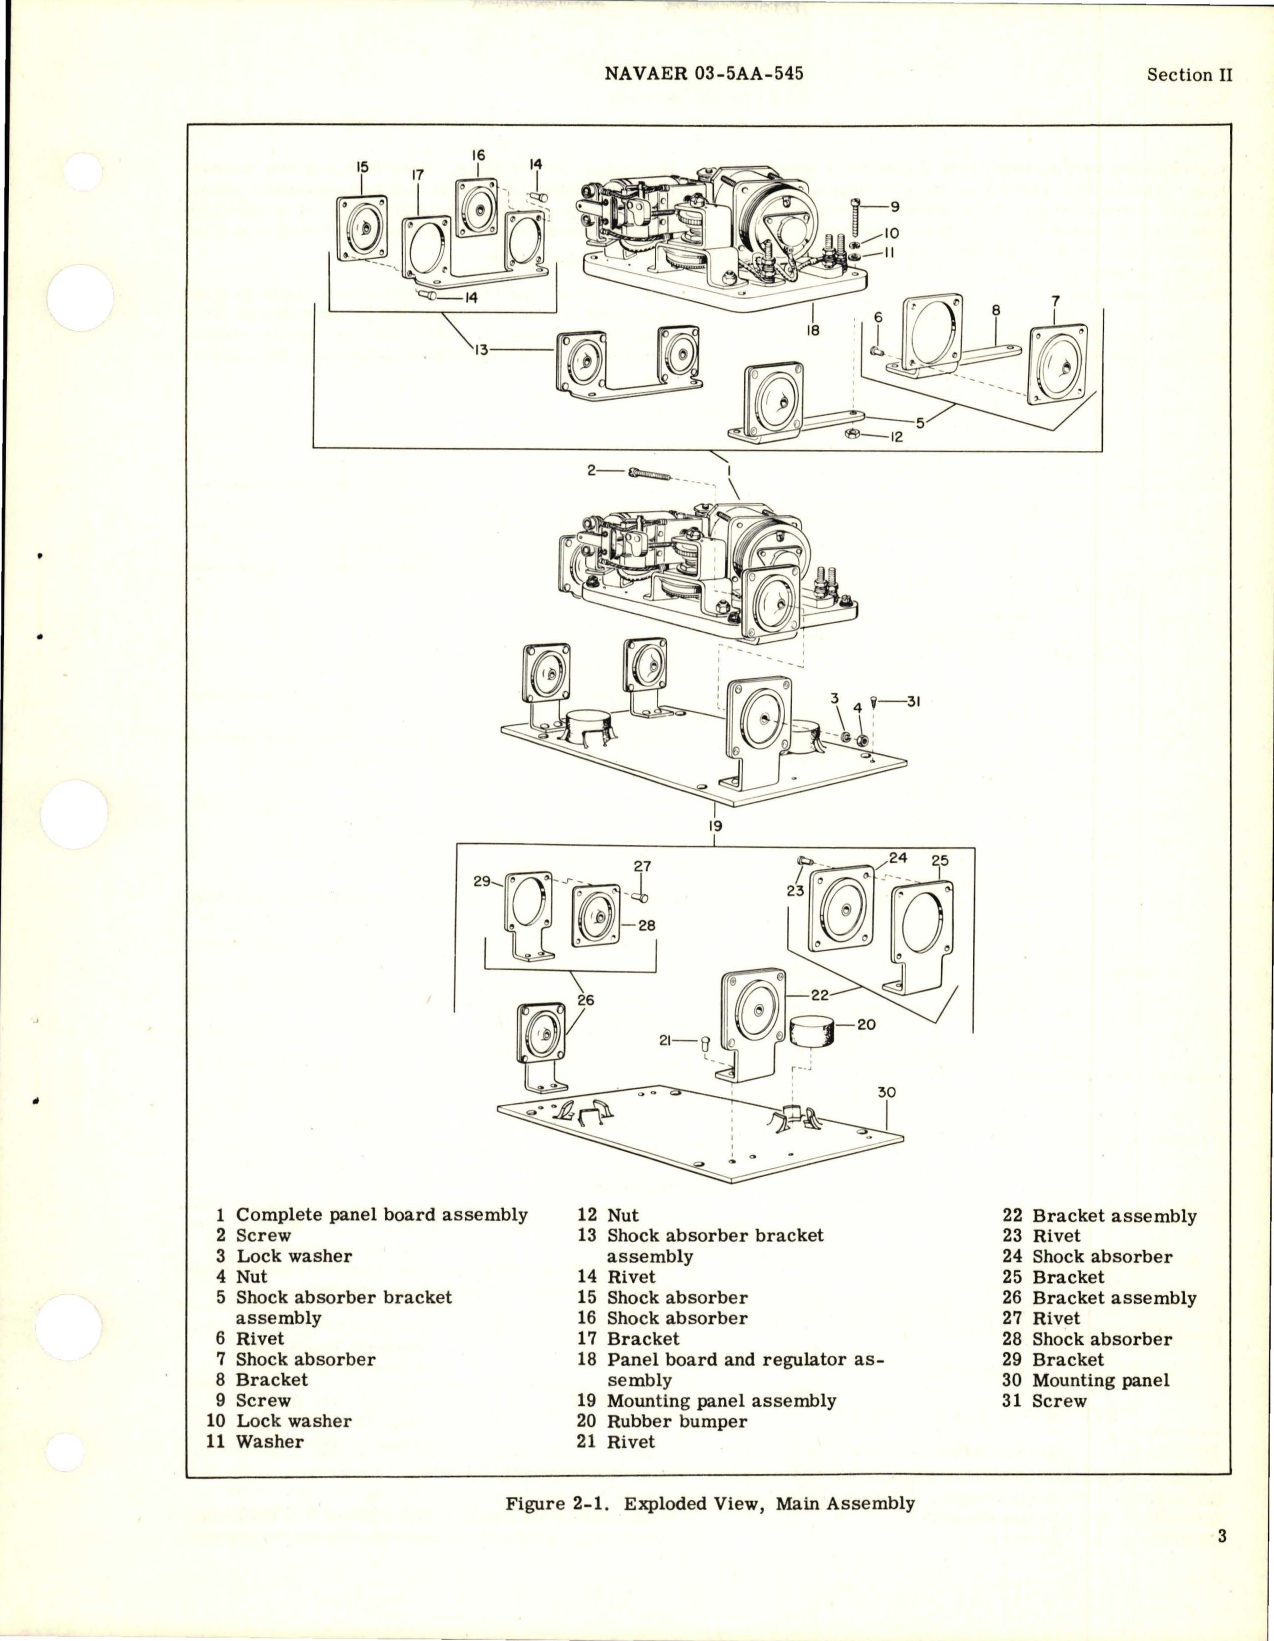 Sample page 5 from AirCorps Library document: Overhaul Instructions for Generator Control Panel - Type 1202-16-A